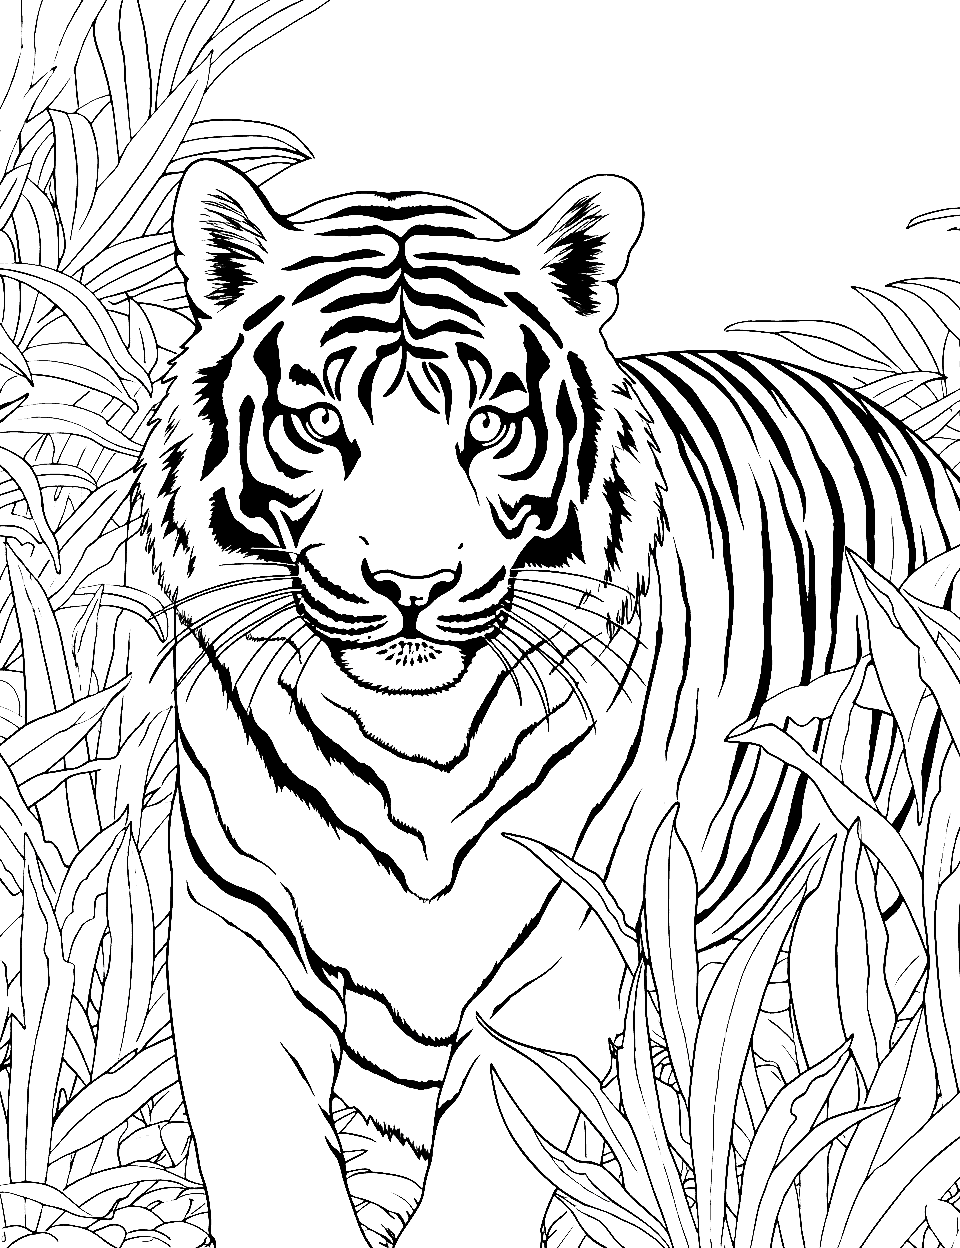 Jungle's Edge Tiger Coloring Page - A tiger peering out from the dense foliage of a rainforest.